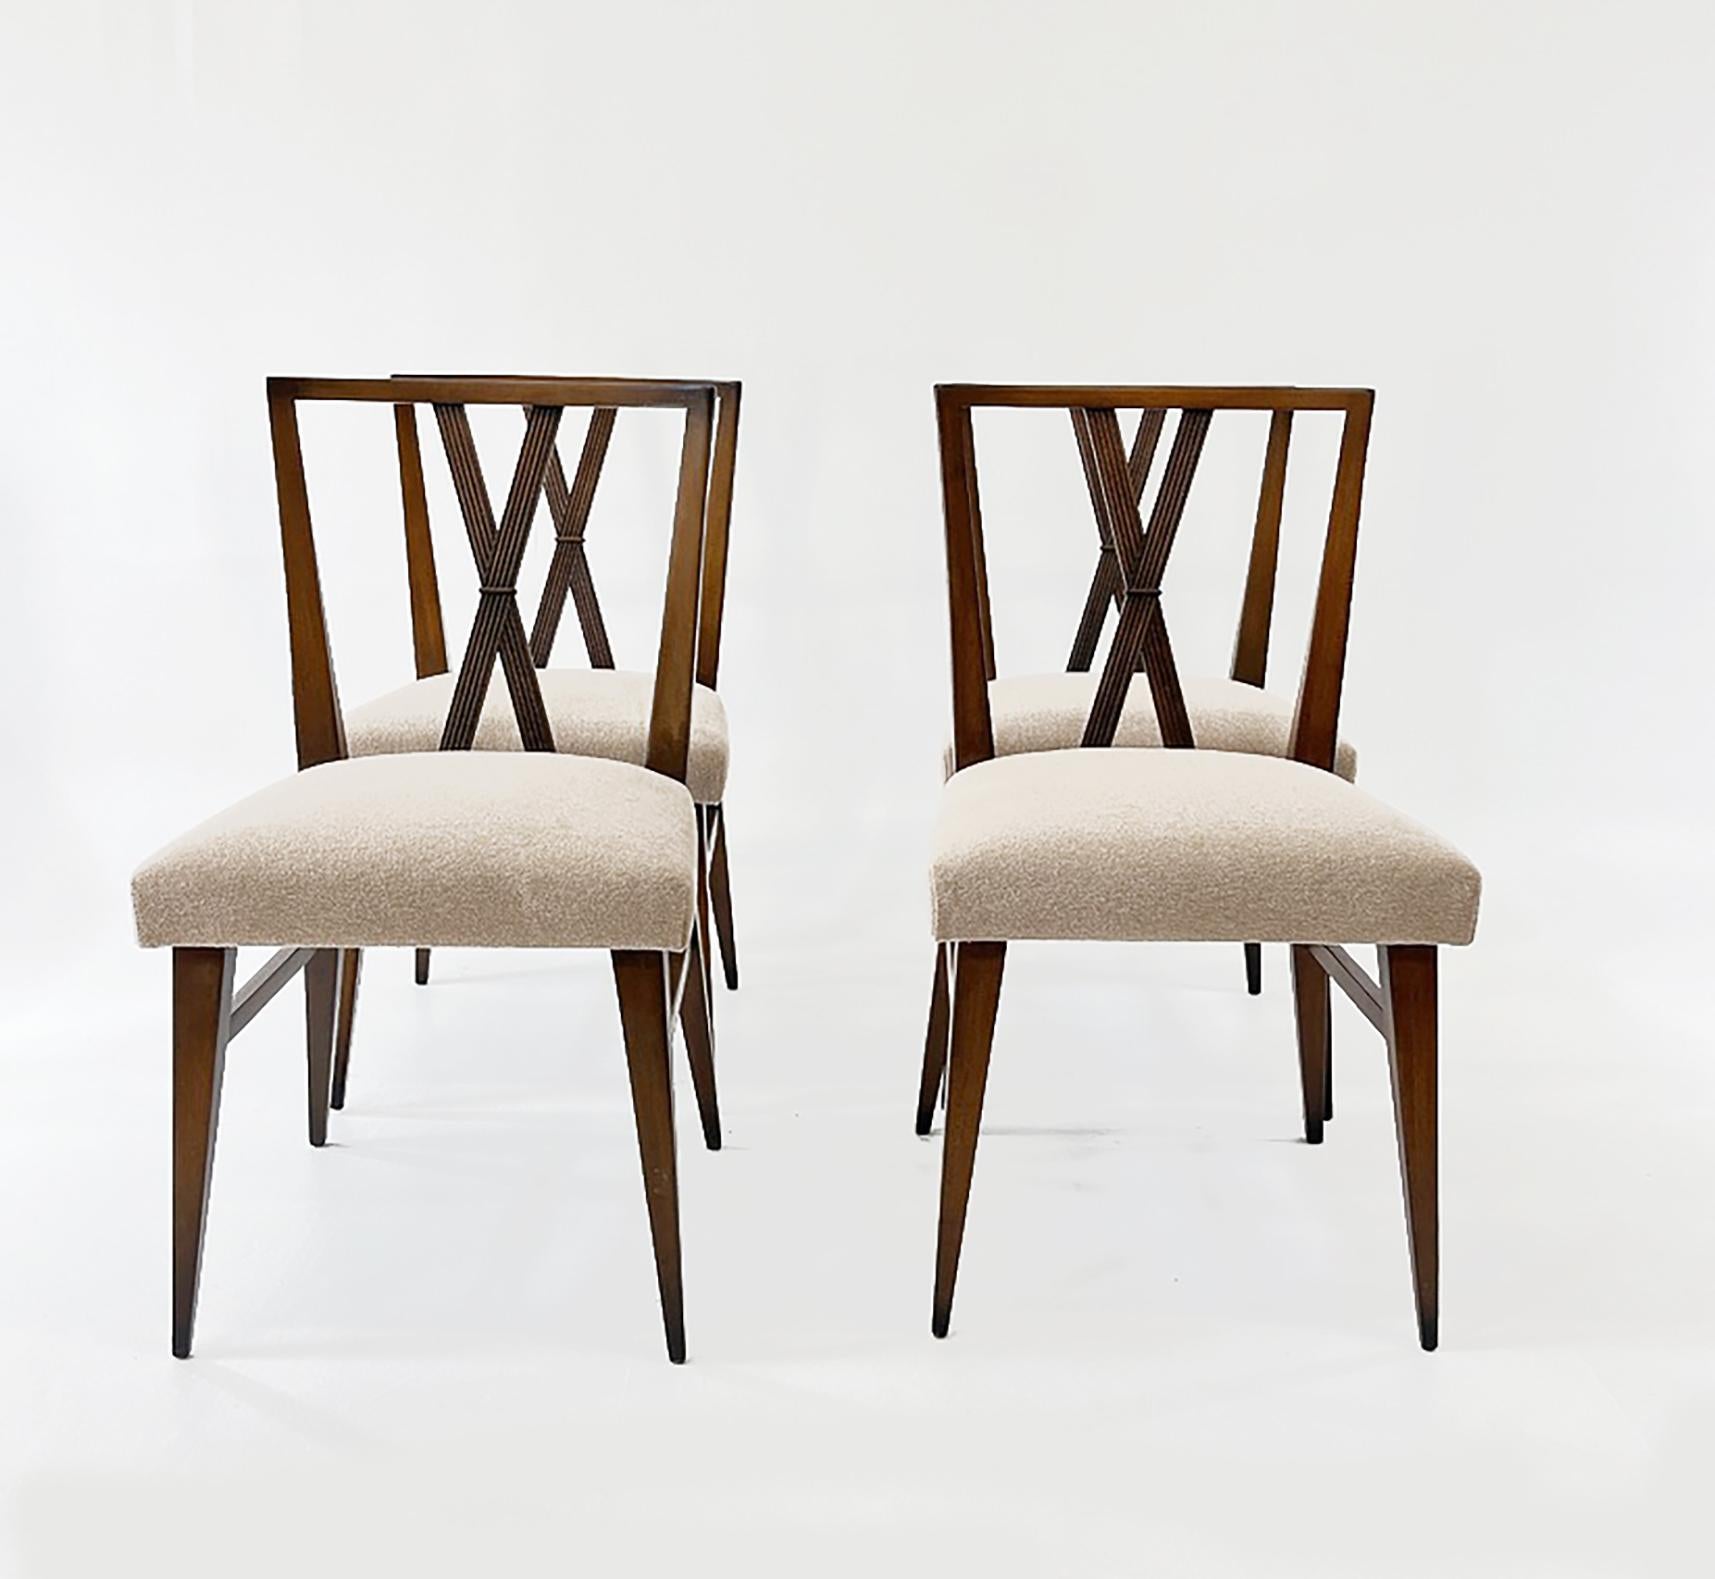 Set of four elegant and timeless design X-back dining chairs by Tommi Parzinger, circa 1950s for Charak Modern. Perfectly refinished solid mahogany frames with new upholstered seats.